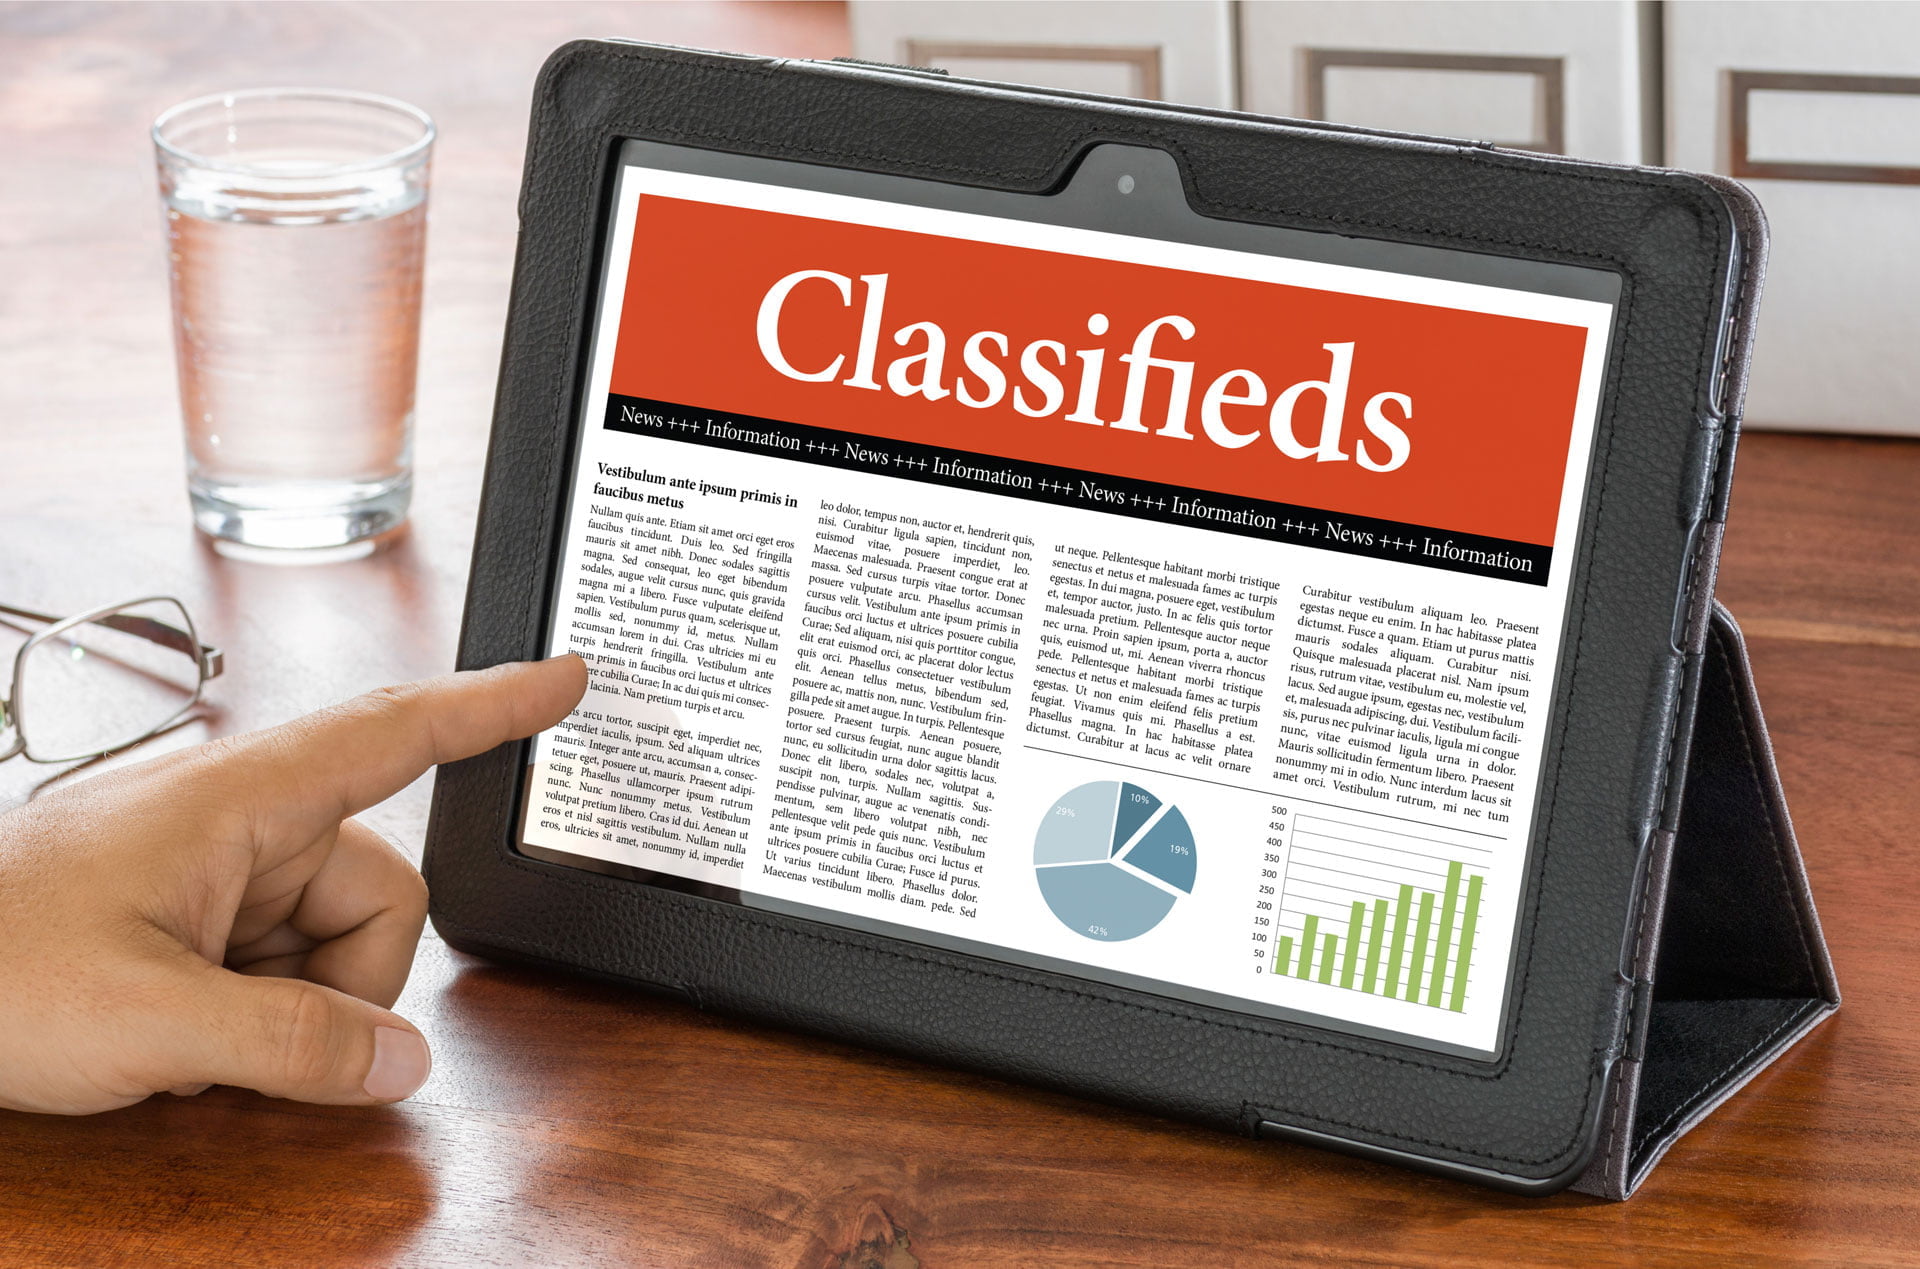 To create effective classified ads traffic, keeping the ad short and to the point, with a clear headline and call to action, is essential